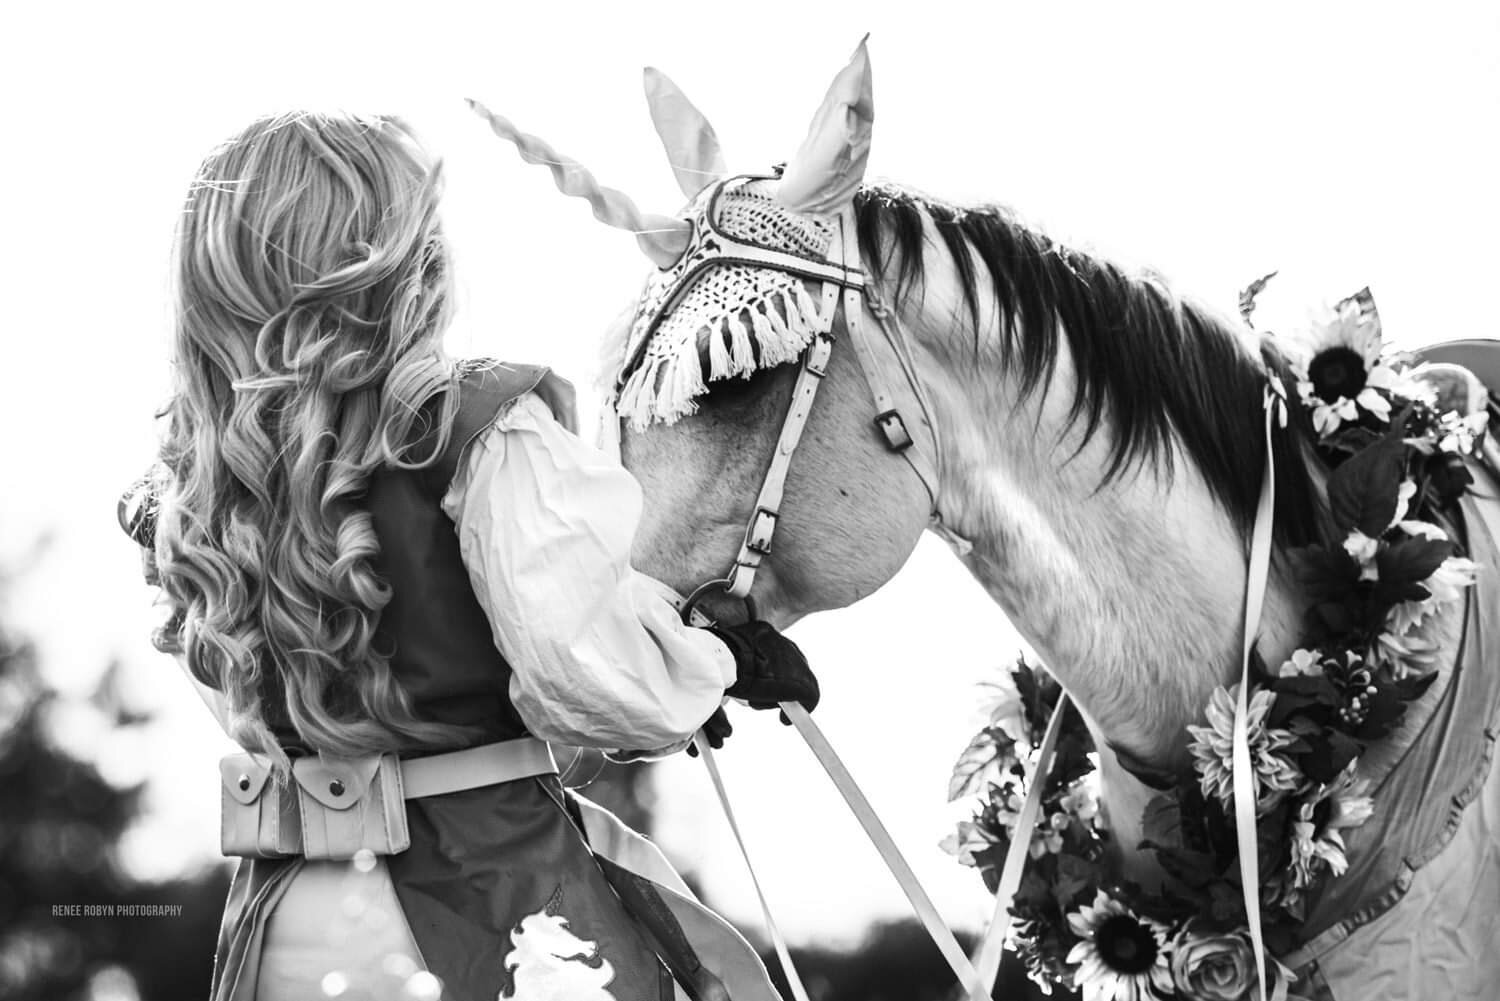 Renee Robyn - Black White Photo of Medieval Unicorn Editorial with Woman Fantasy Lady Knight.jpeg